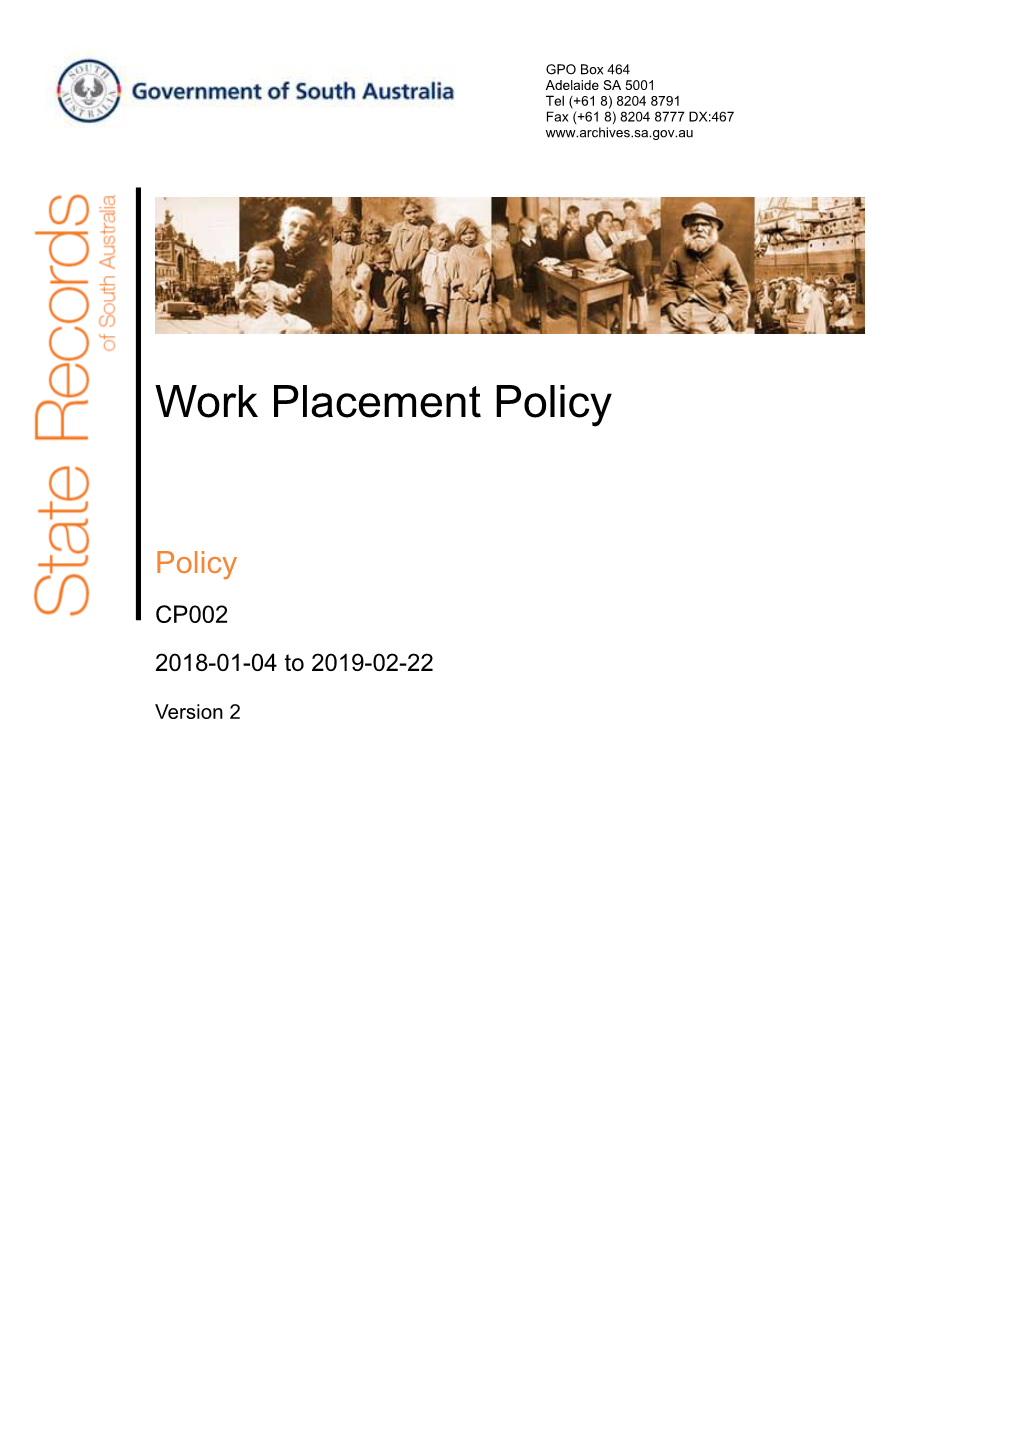 20180223 Work Placement Policy Final V2